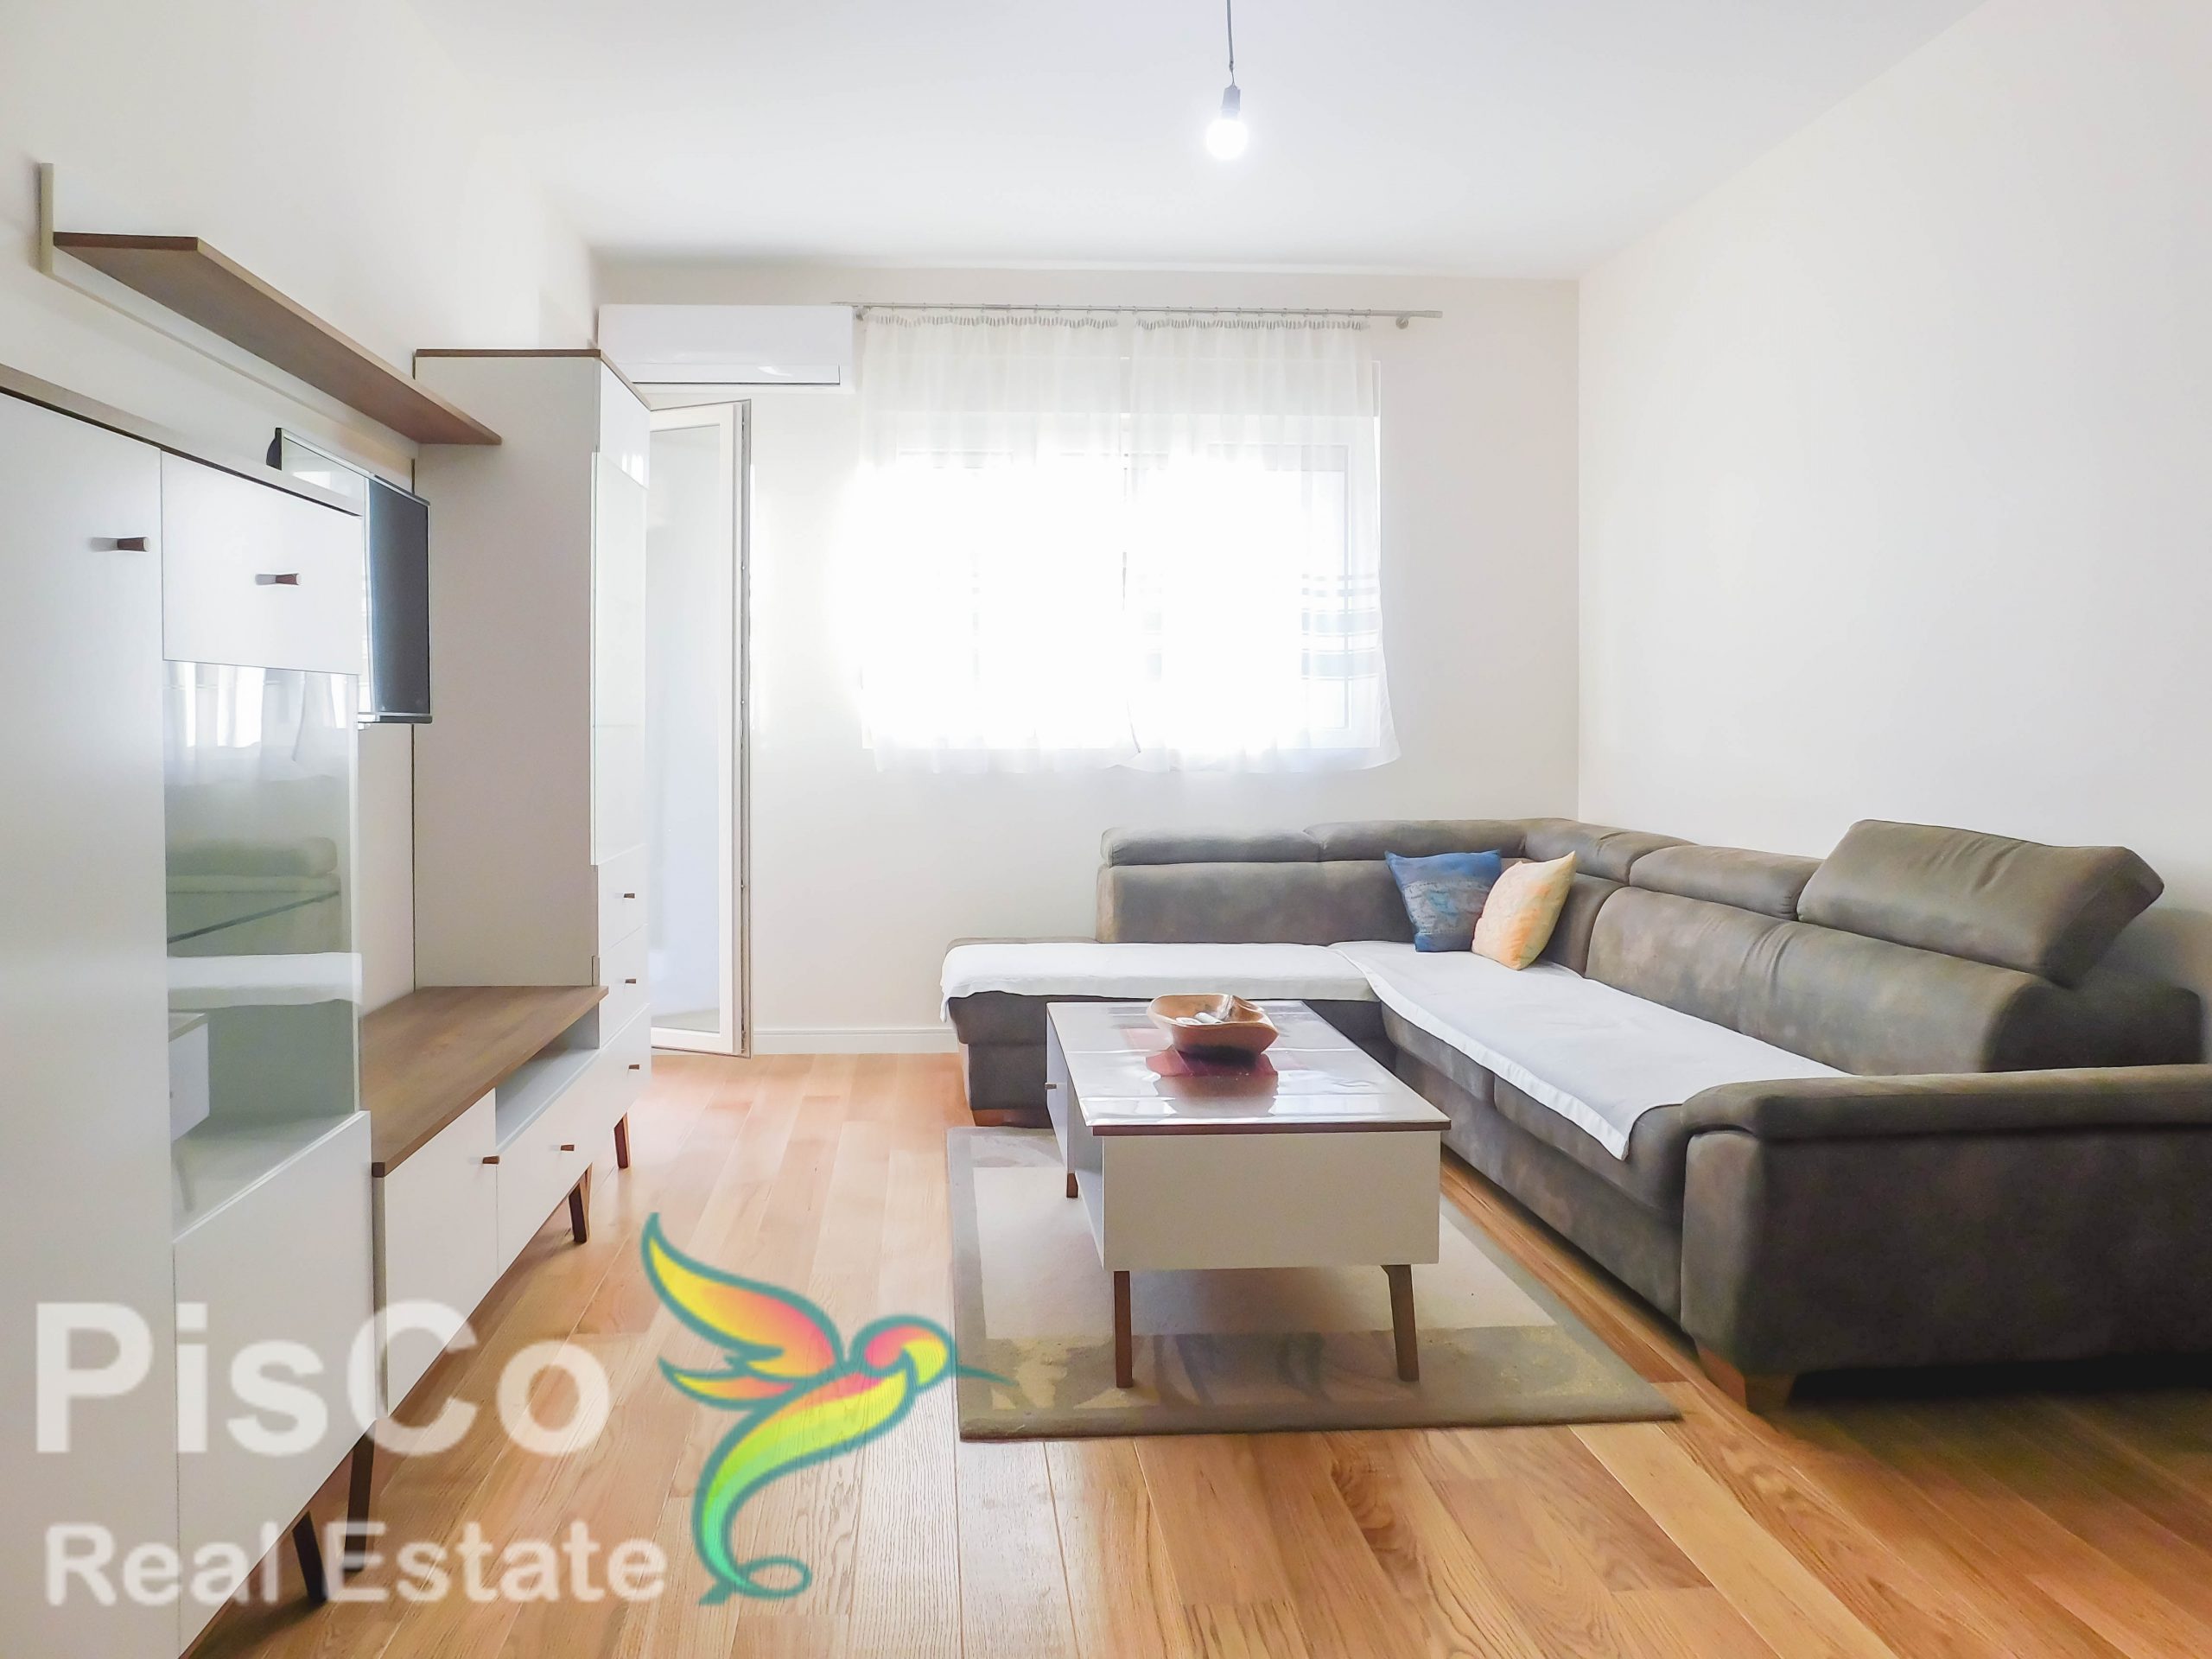 Nicely furnished one bedroom apartment for rent in Central Point 50m2